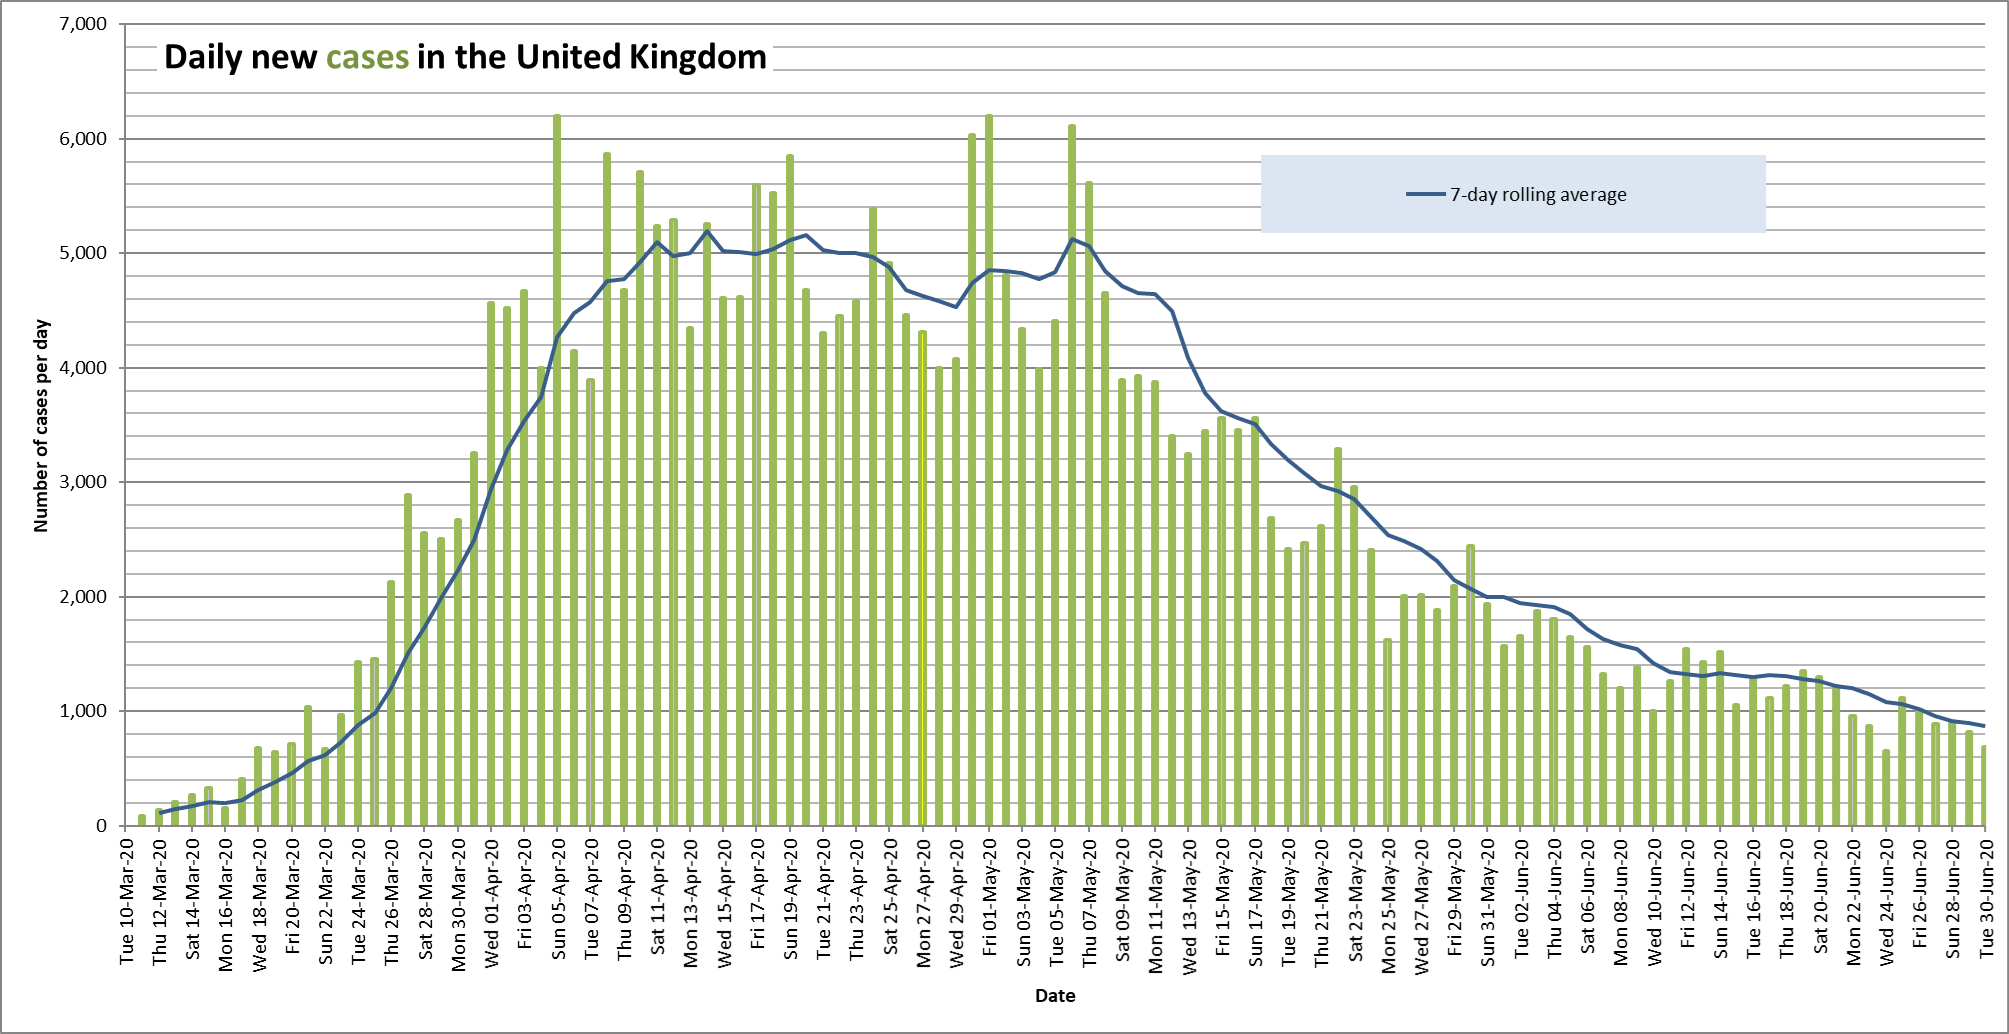 Chart of UK COVID 19 daily new cases to 30 June 2020